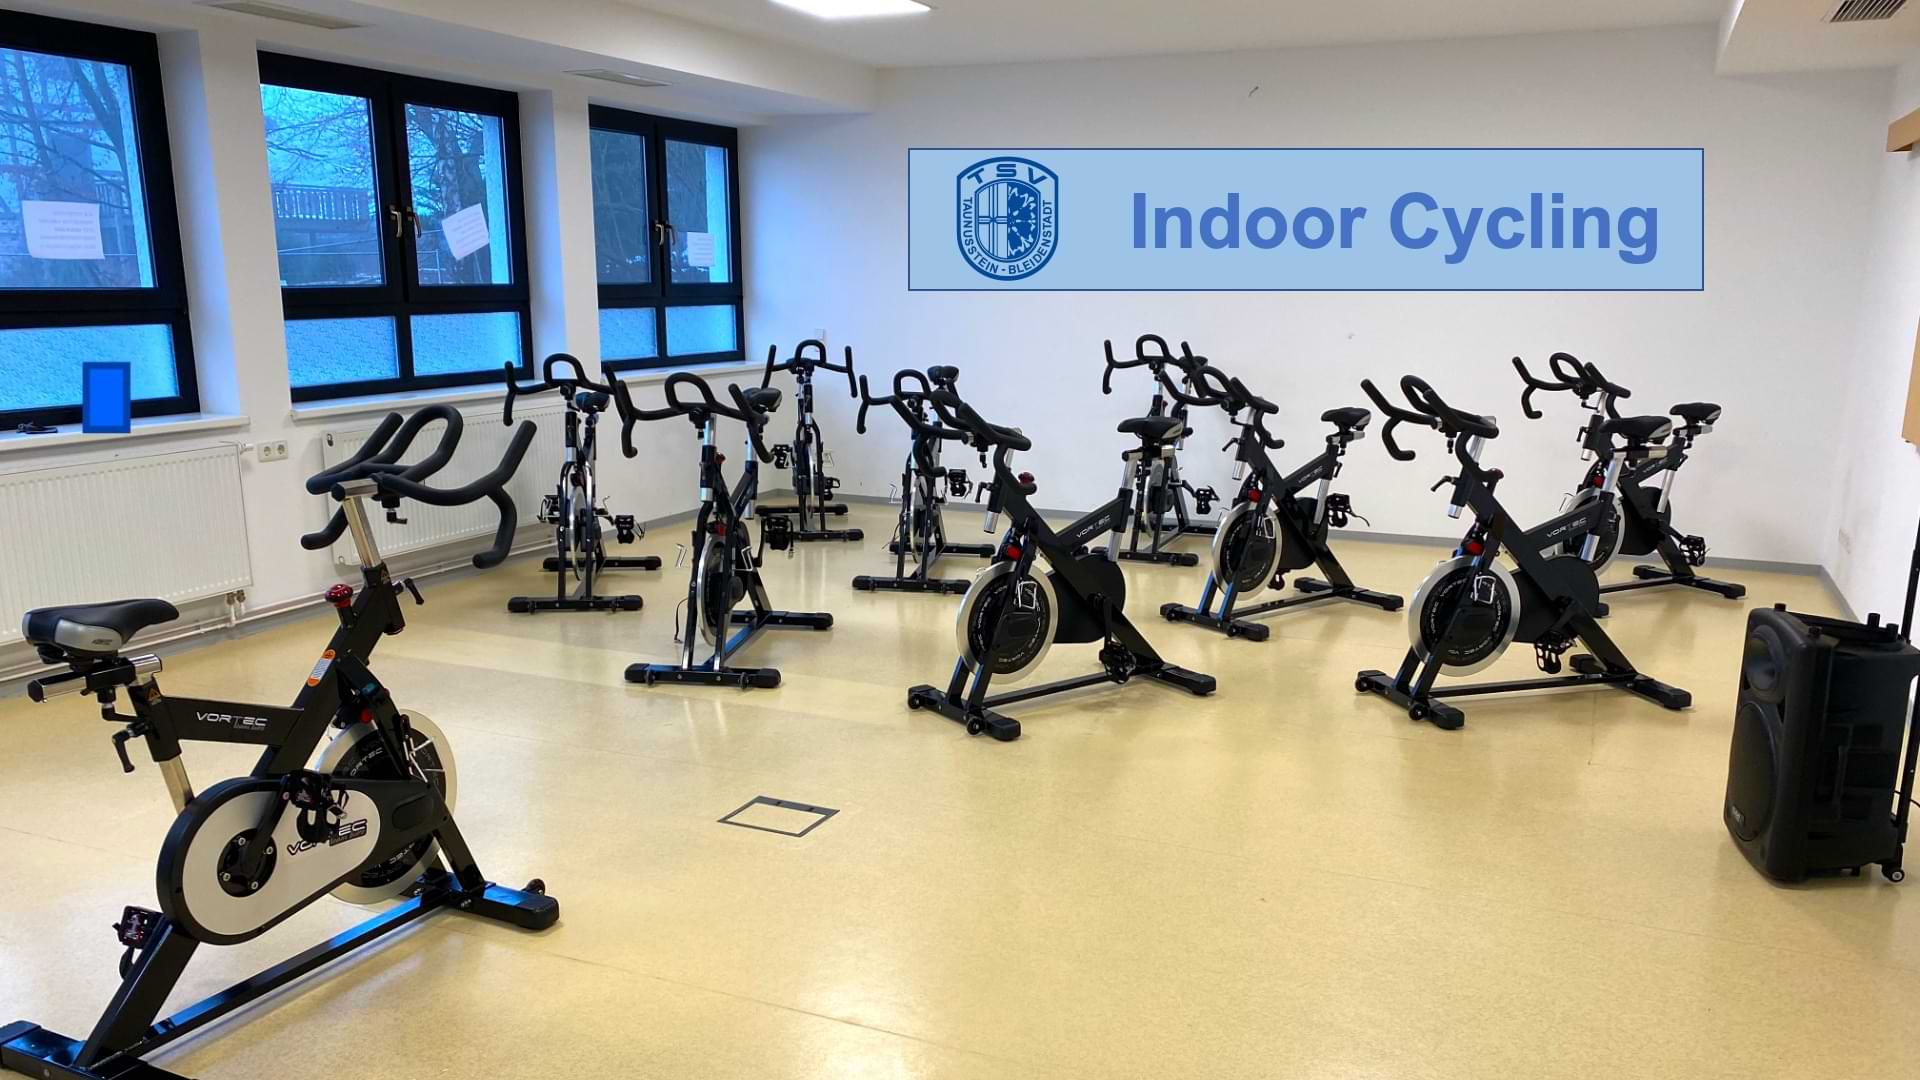 Indoorcycling Termine im April